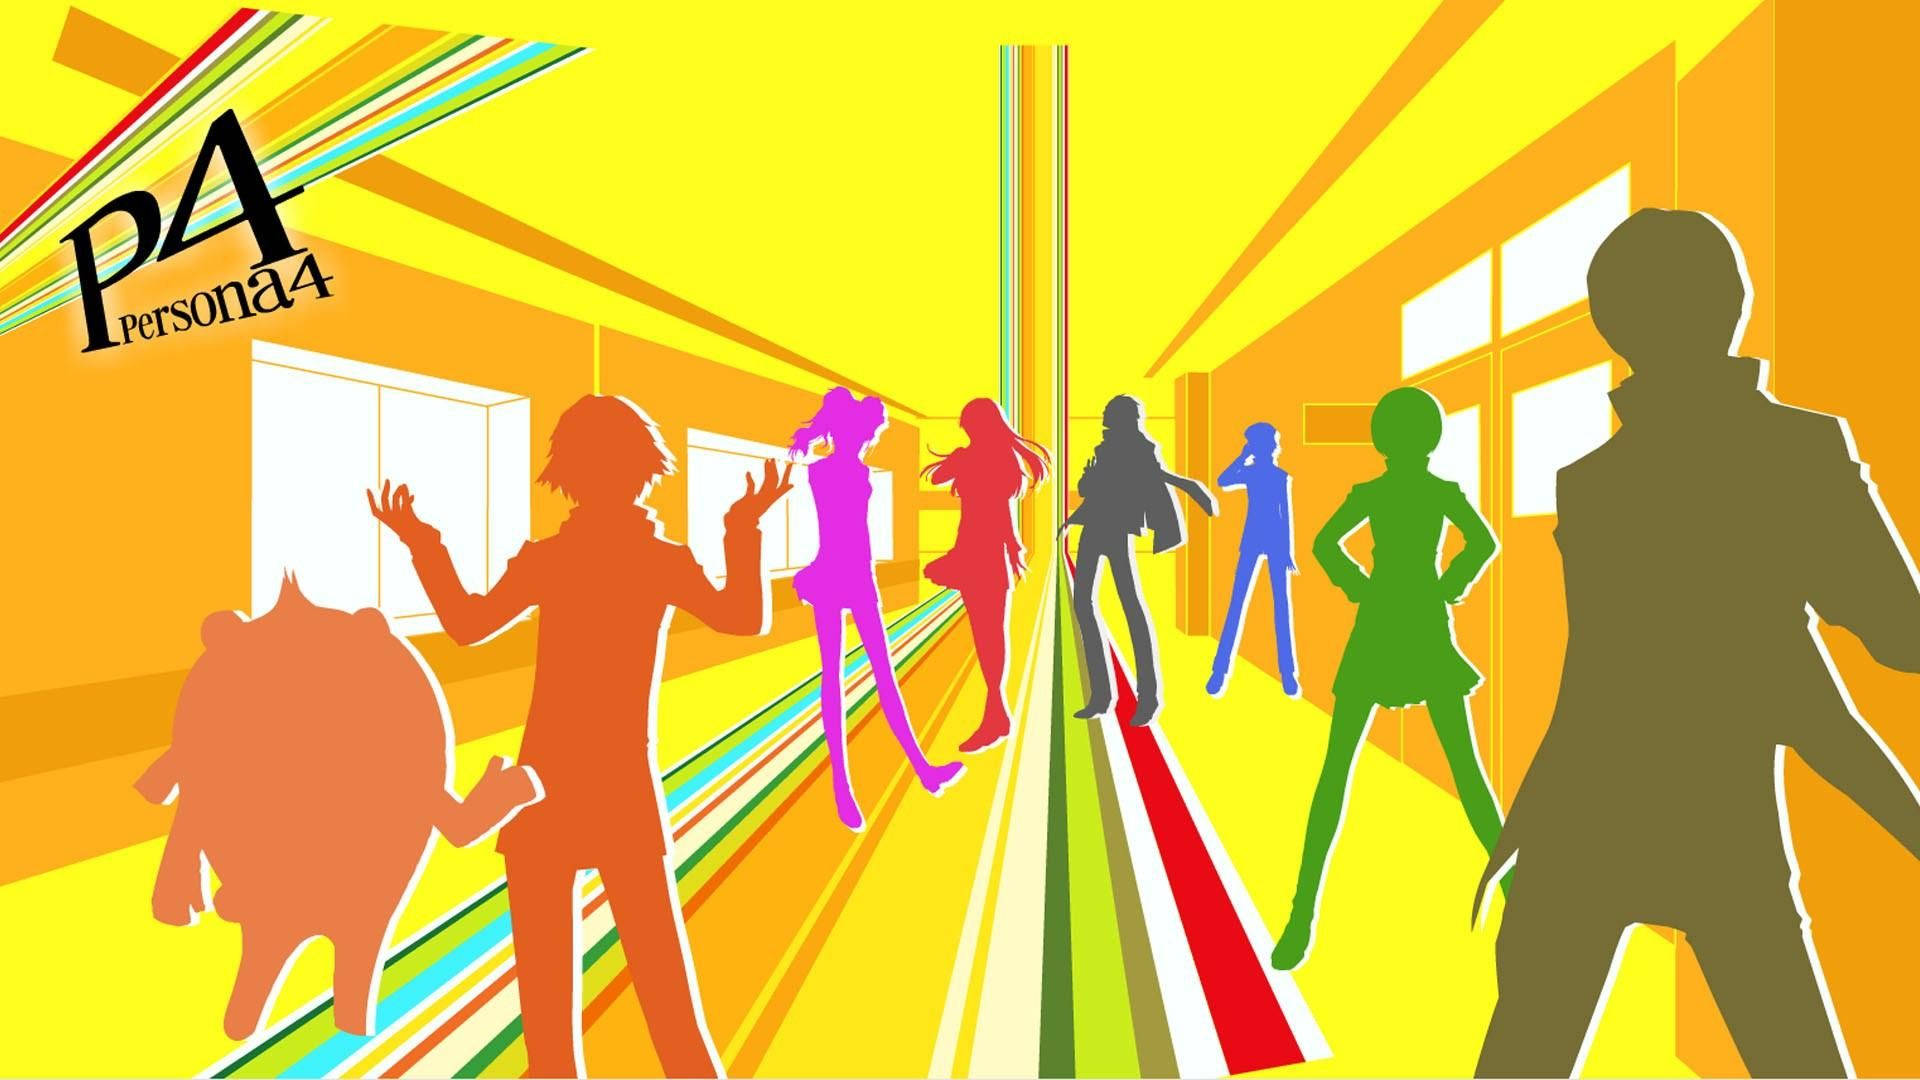 Persona 4 Colorful Silhouettes Background